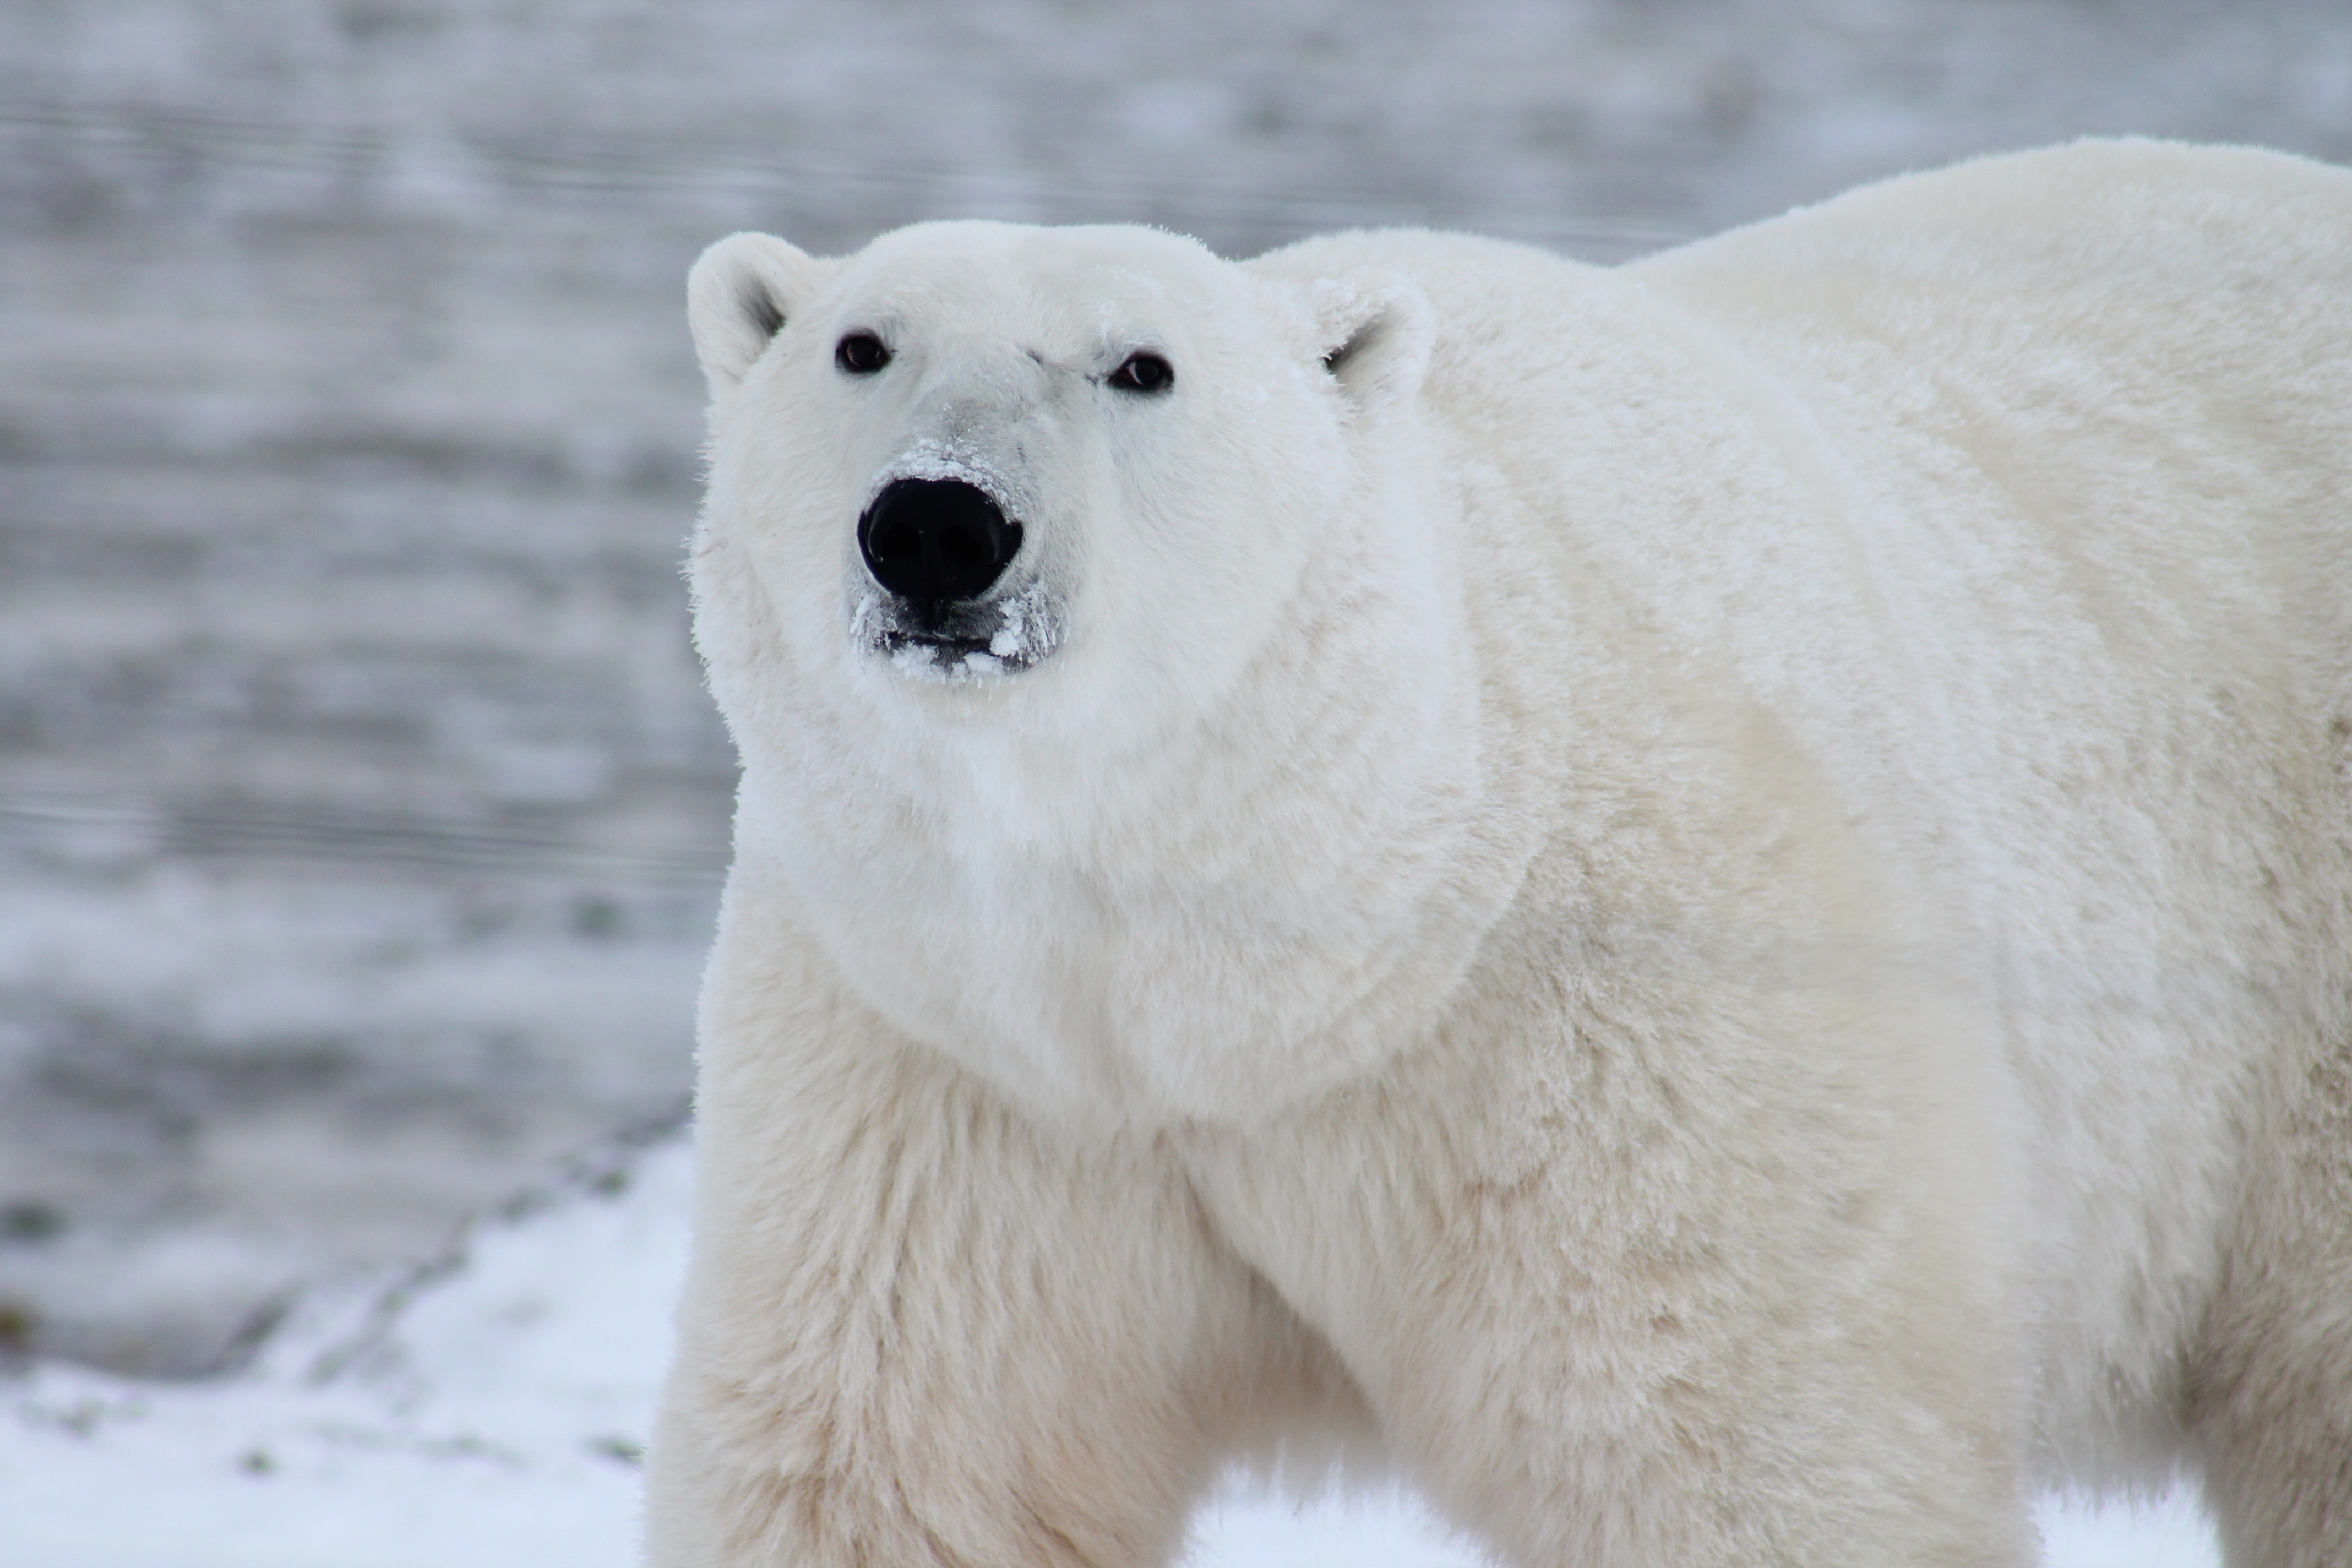 Polar bear with snow on his muzzle, looking directly into the camera